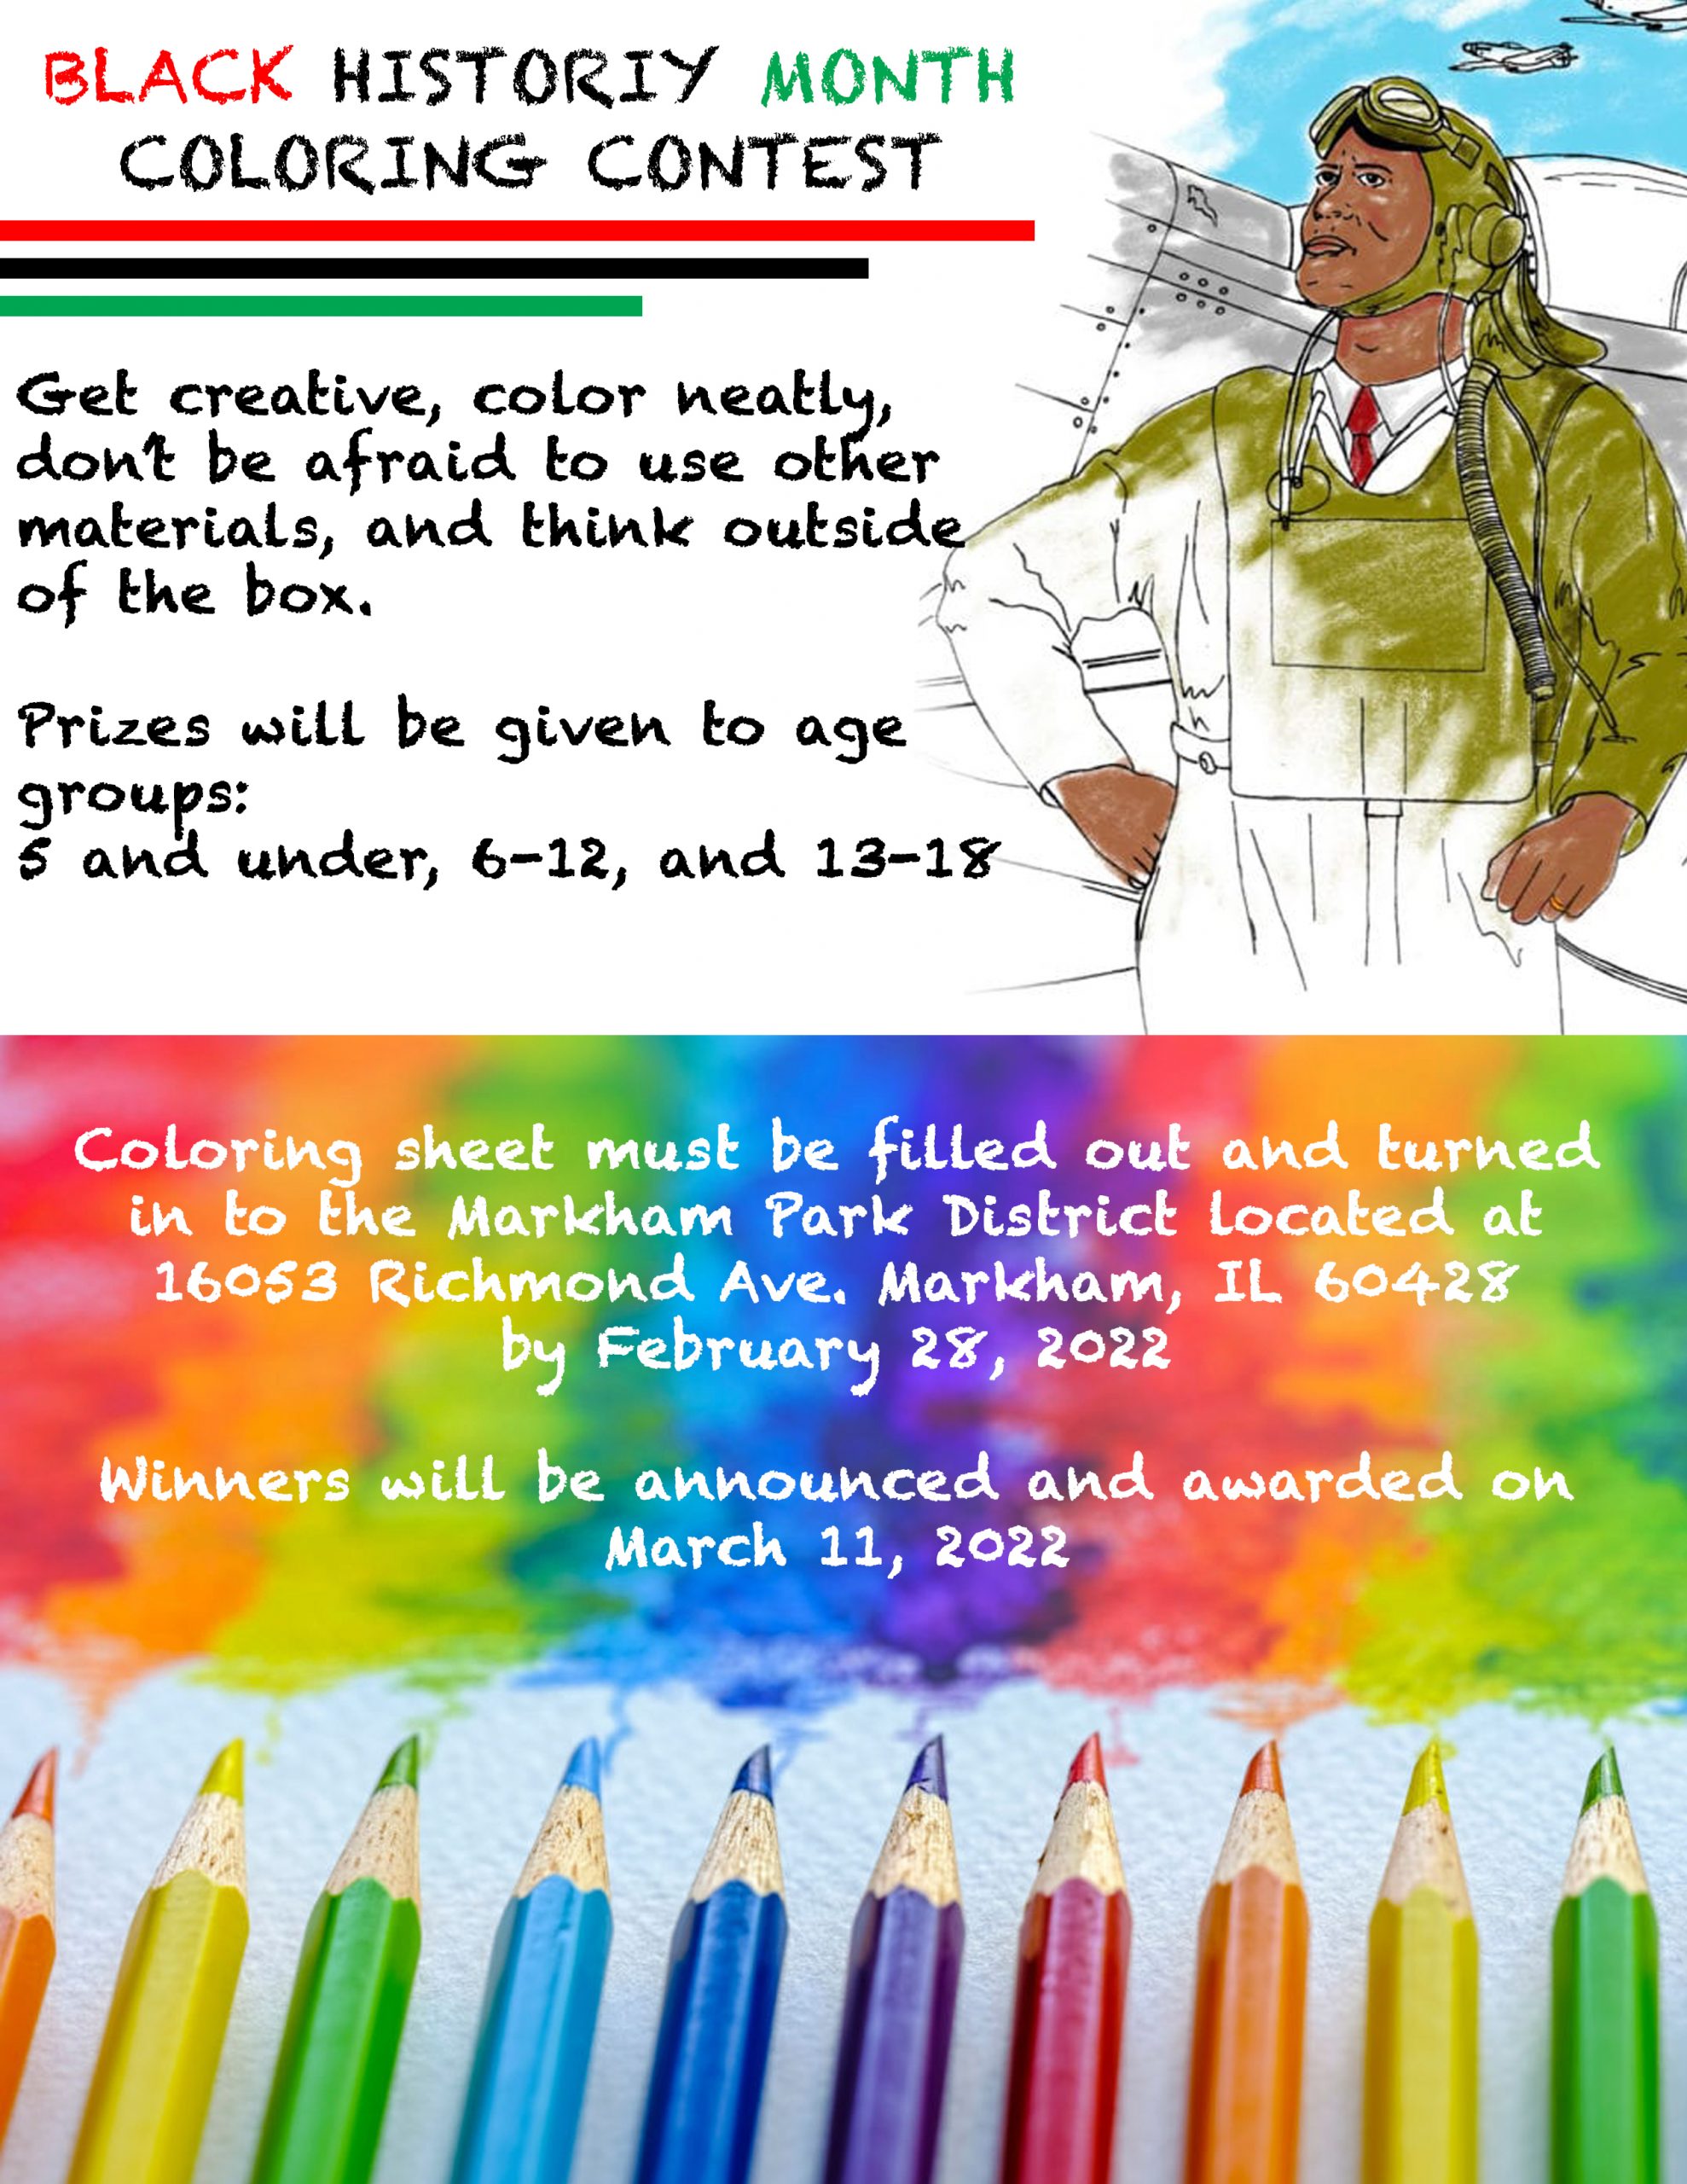 Black History Month Coloring